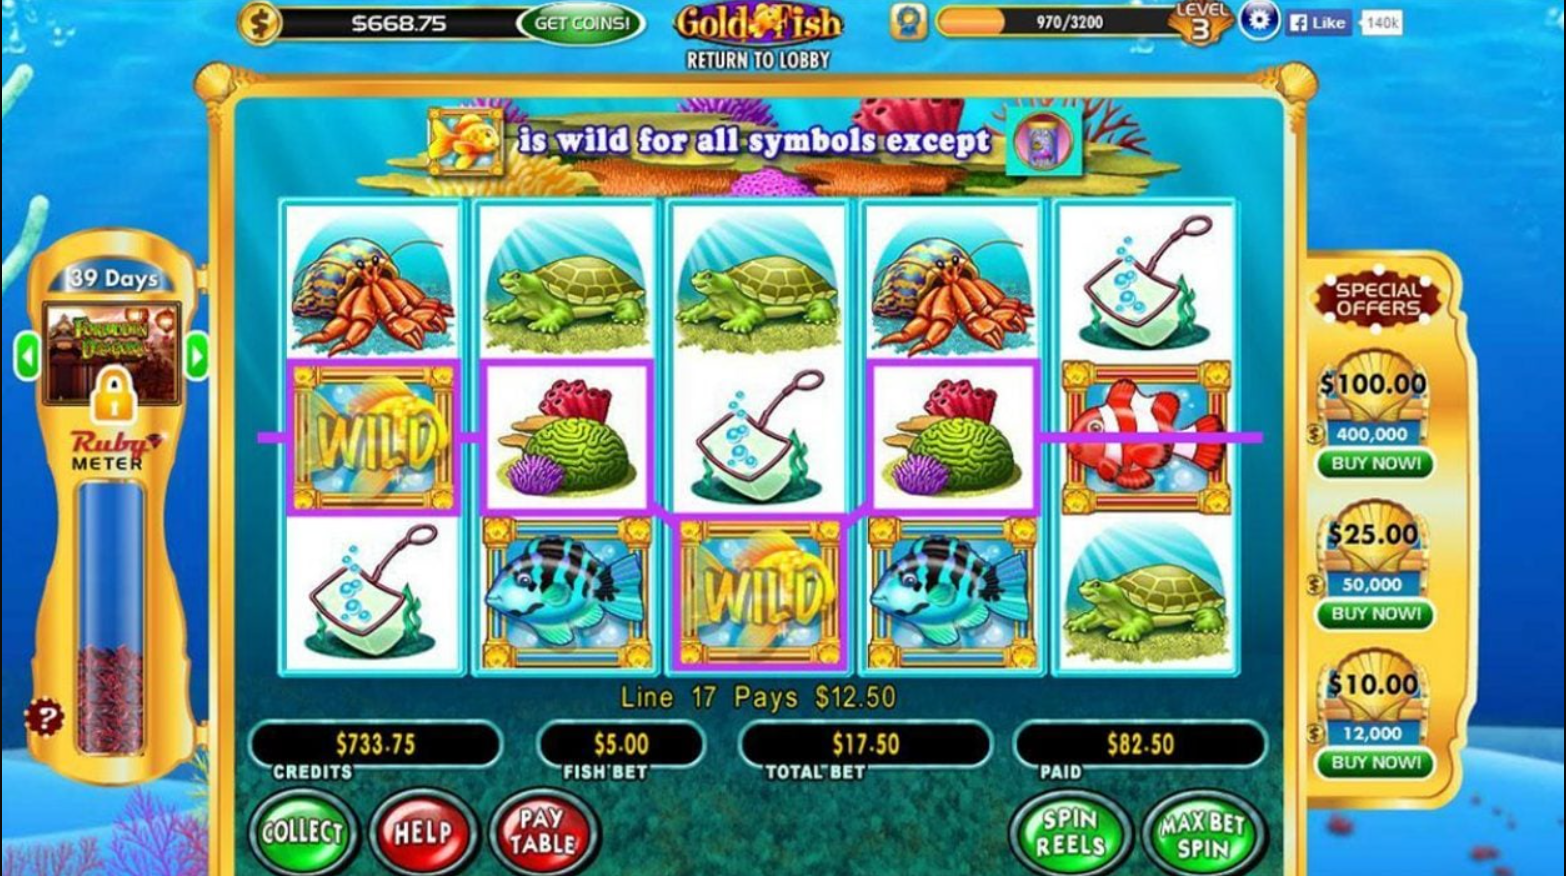 Withdrawal at Online Casino 3